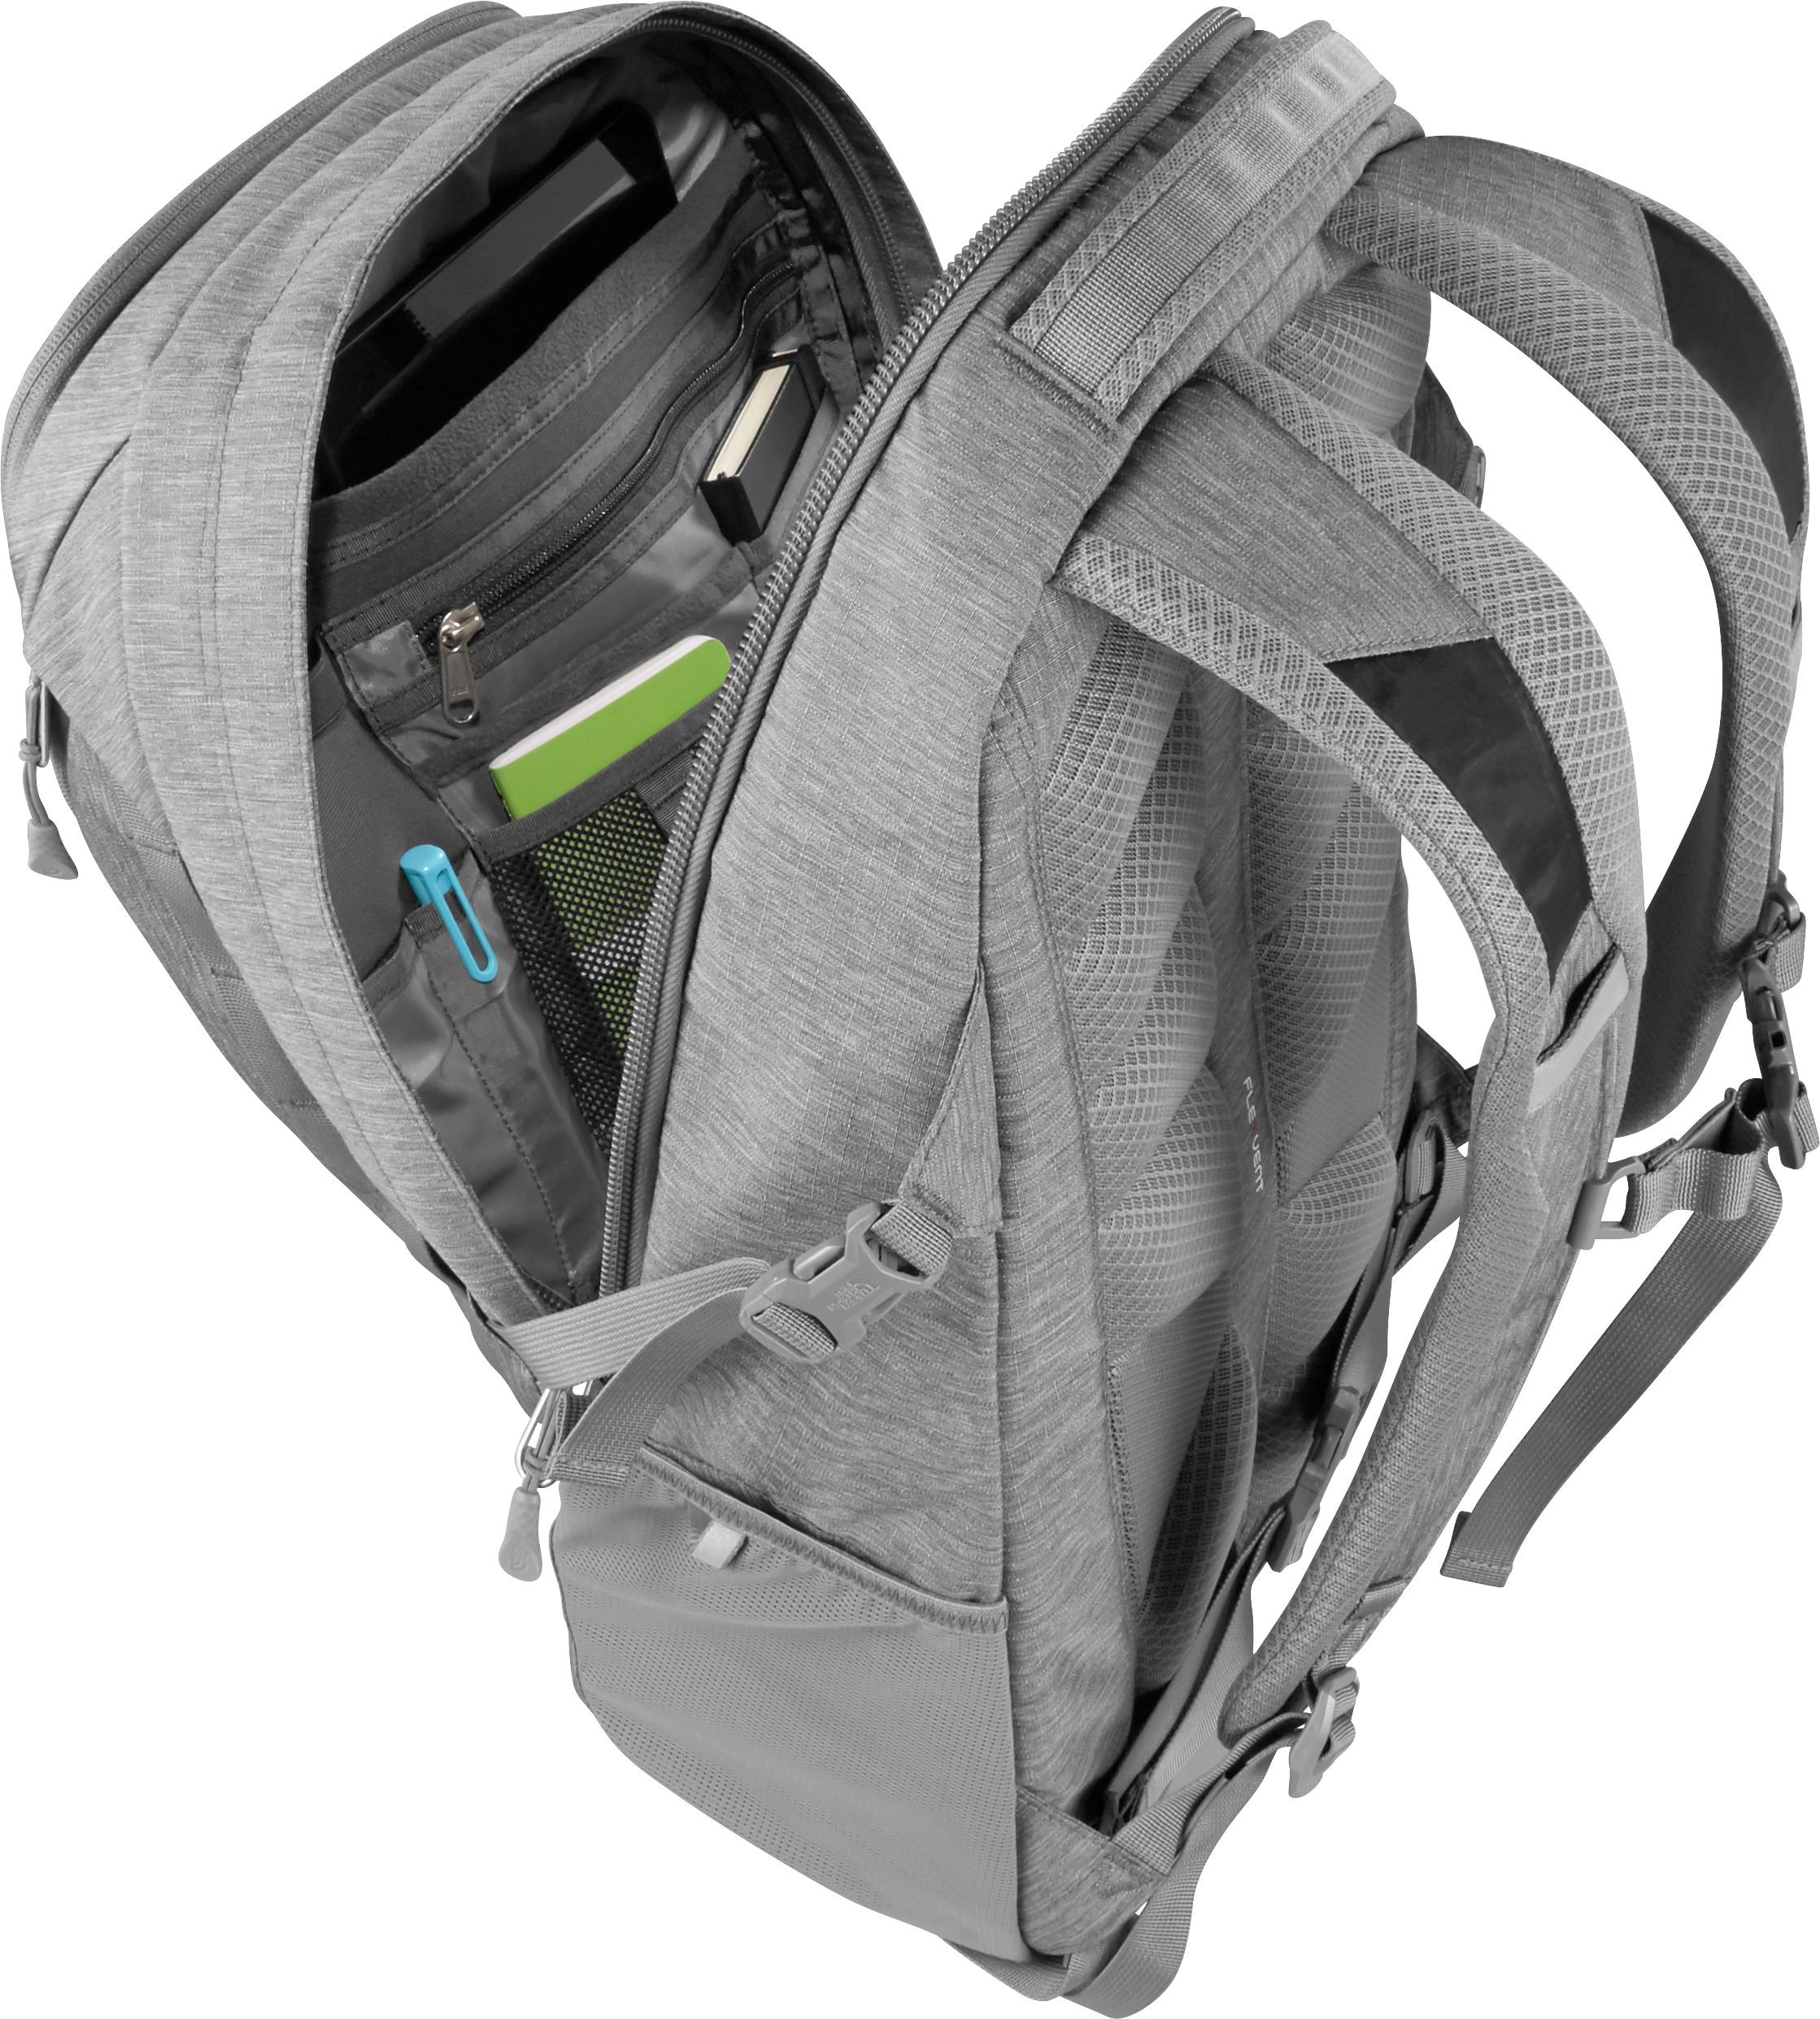 the north face mainframe backpack